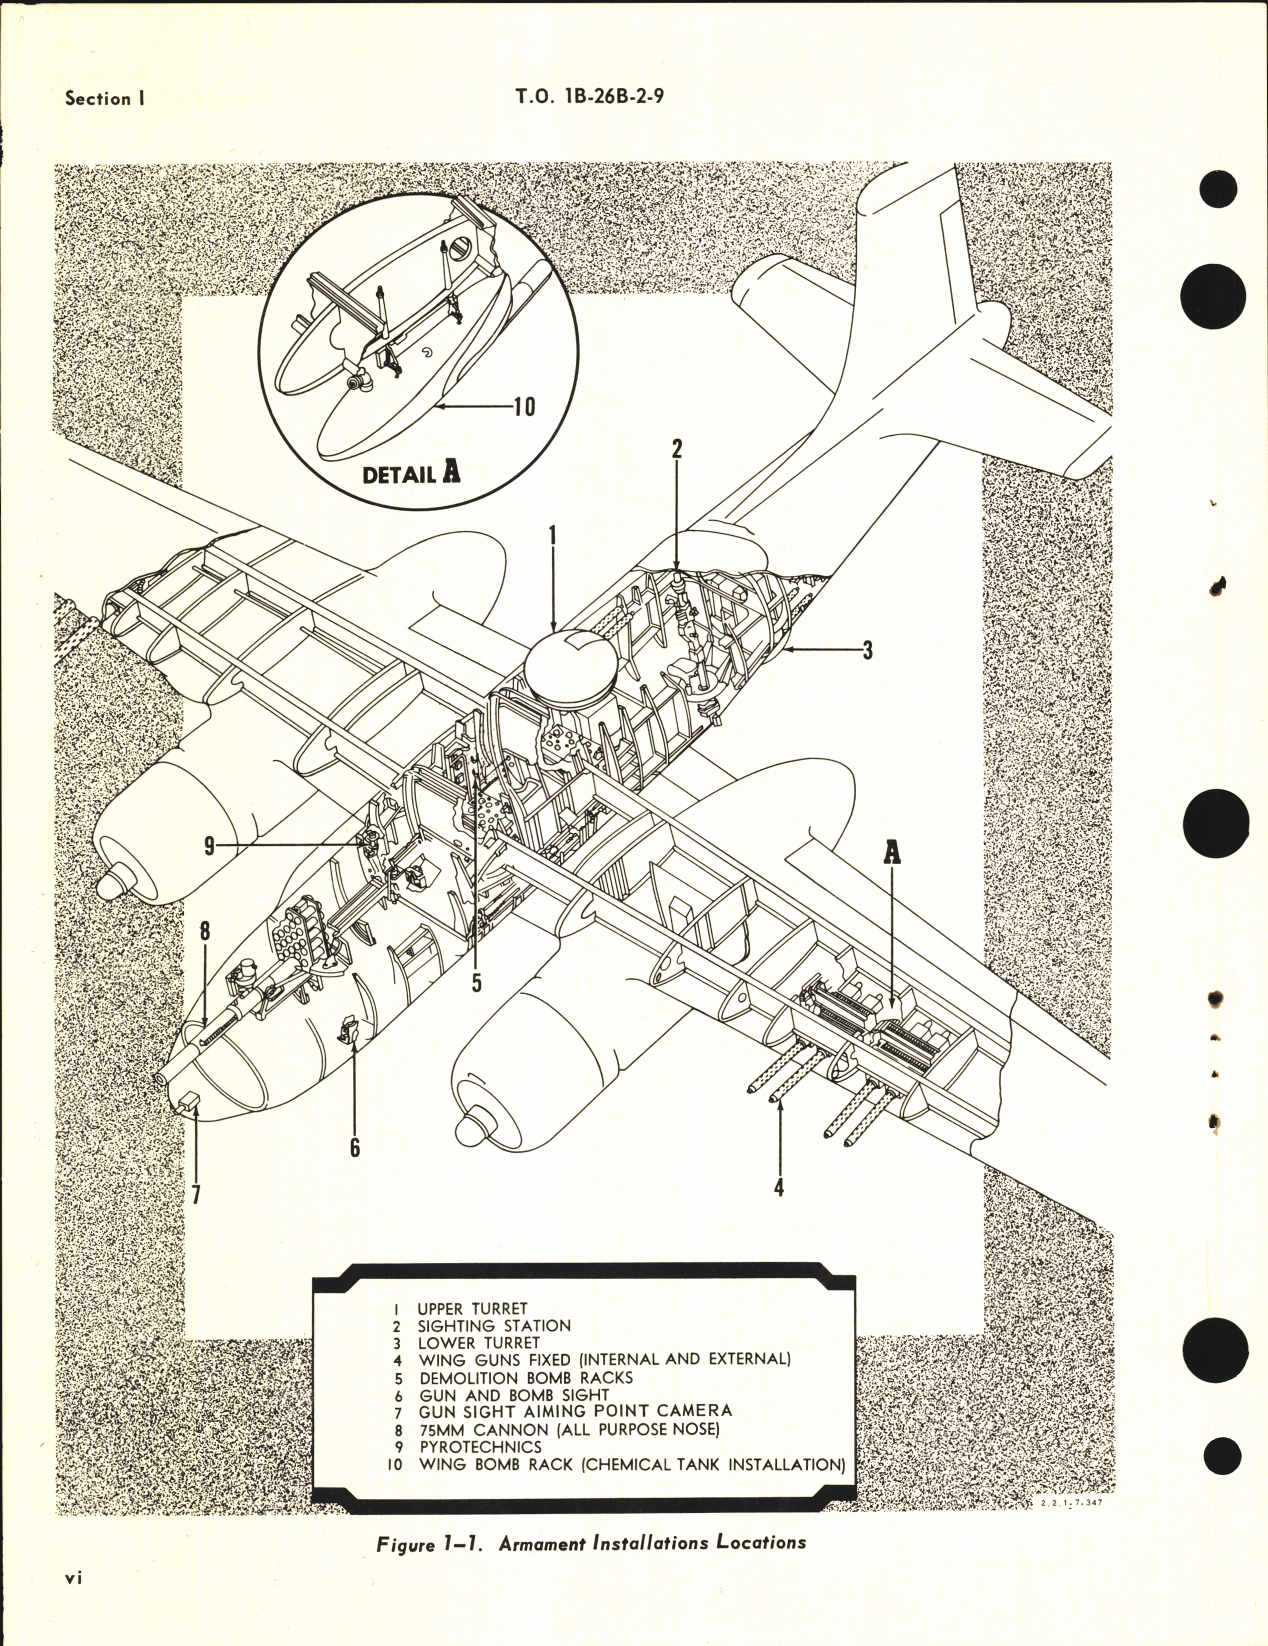 Sample page 8 from AirCorps Library document: Maintenance Instructions for B-26B, B-26C, TB-26B, TB-26C, and JD-1 - Armament & Related Equipment